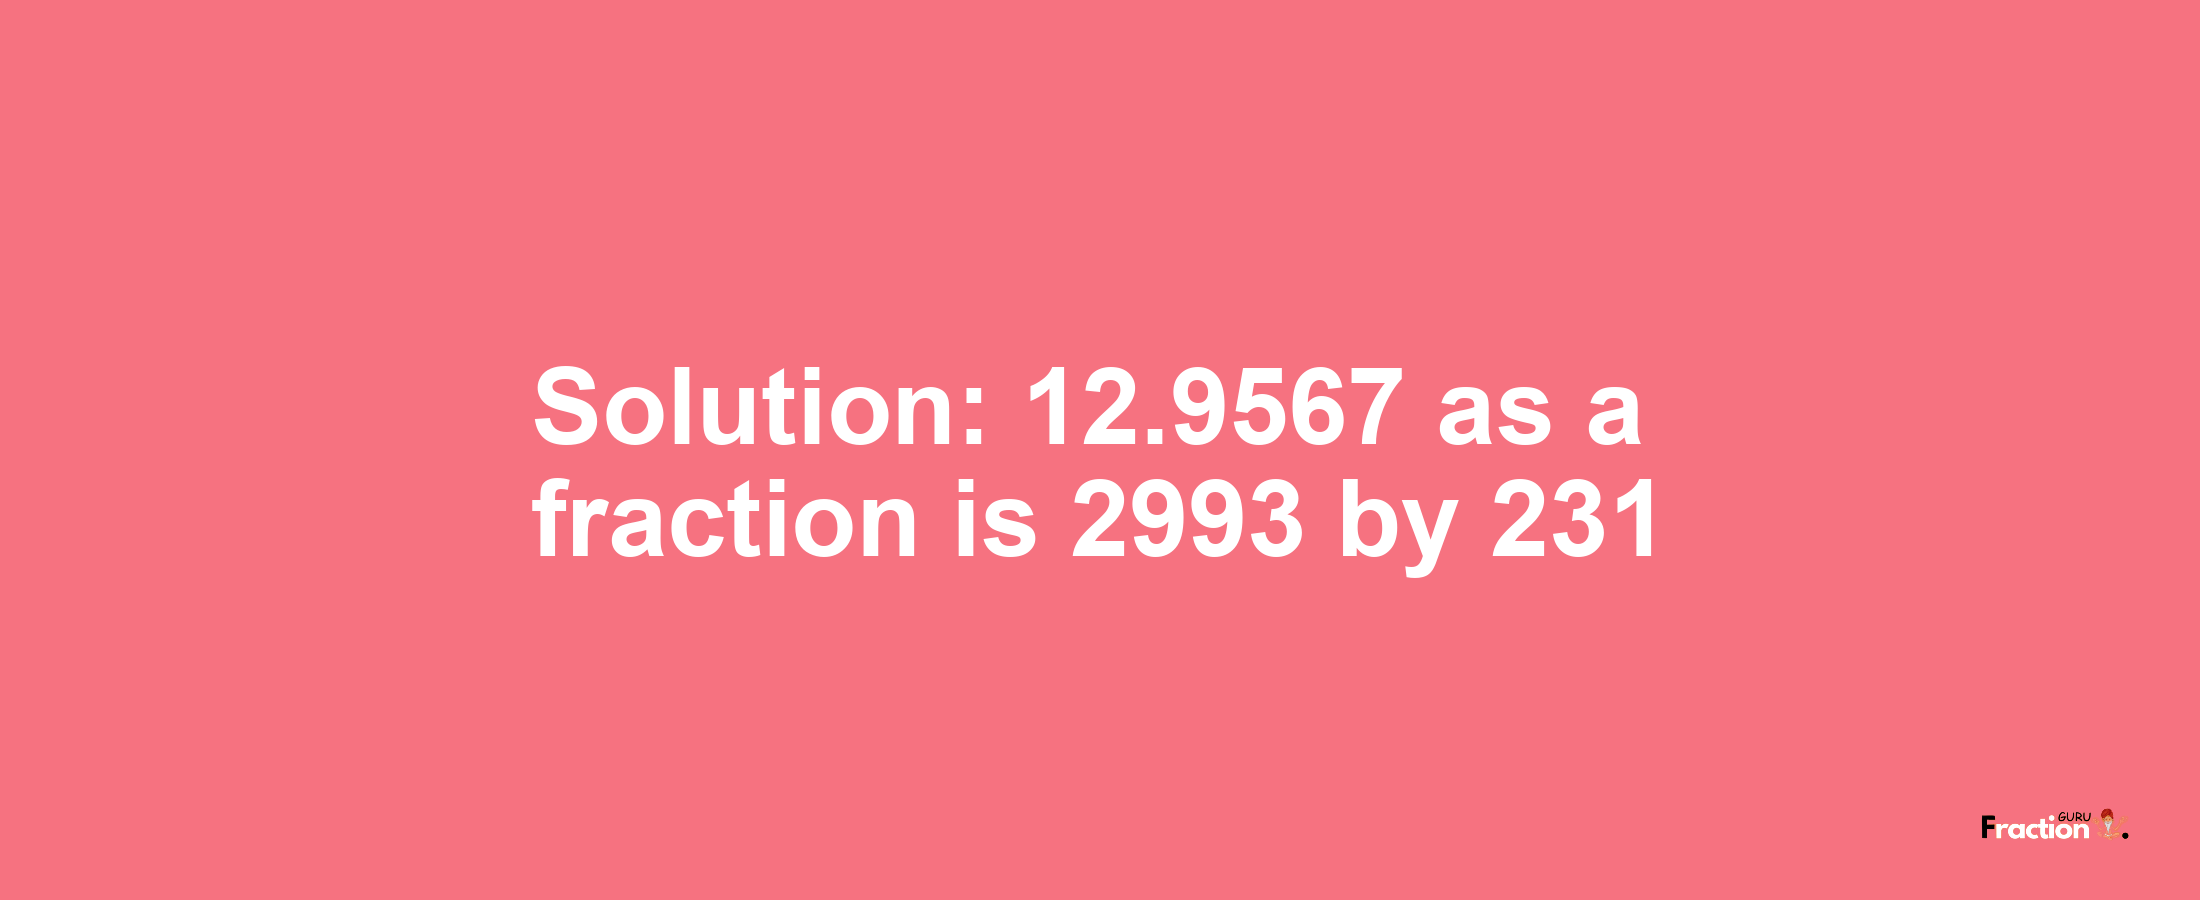 Solution:12.9567 as a fraction is 2993/231